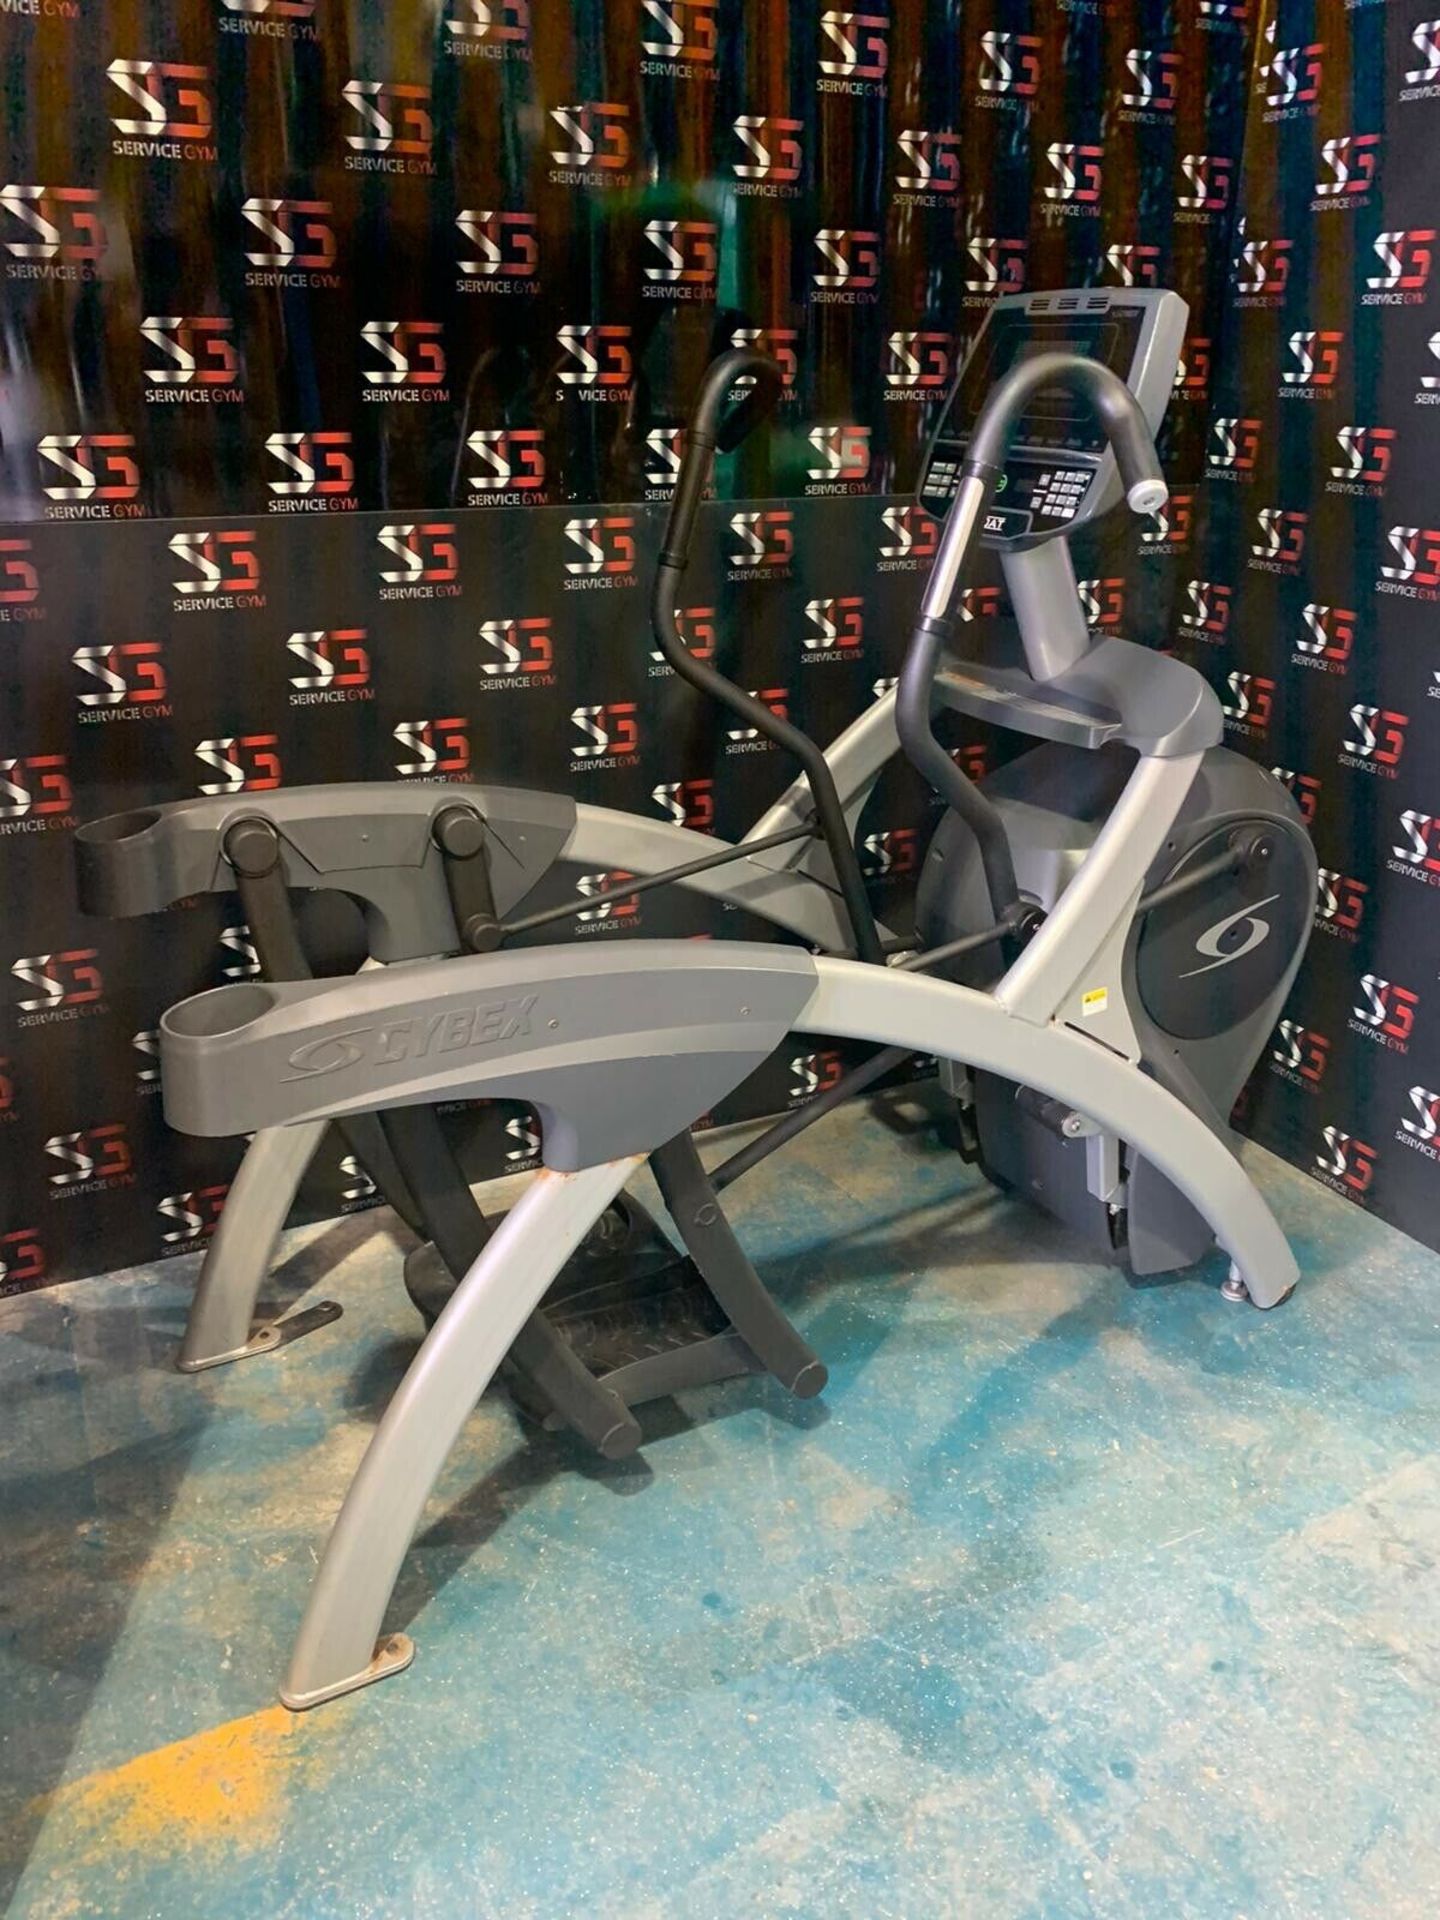 Cybex ARC Trainer 750AT - Image 3 of 3